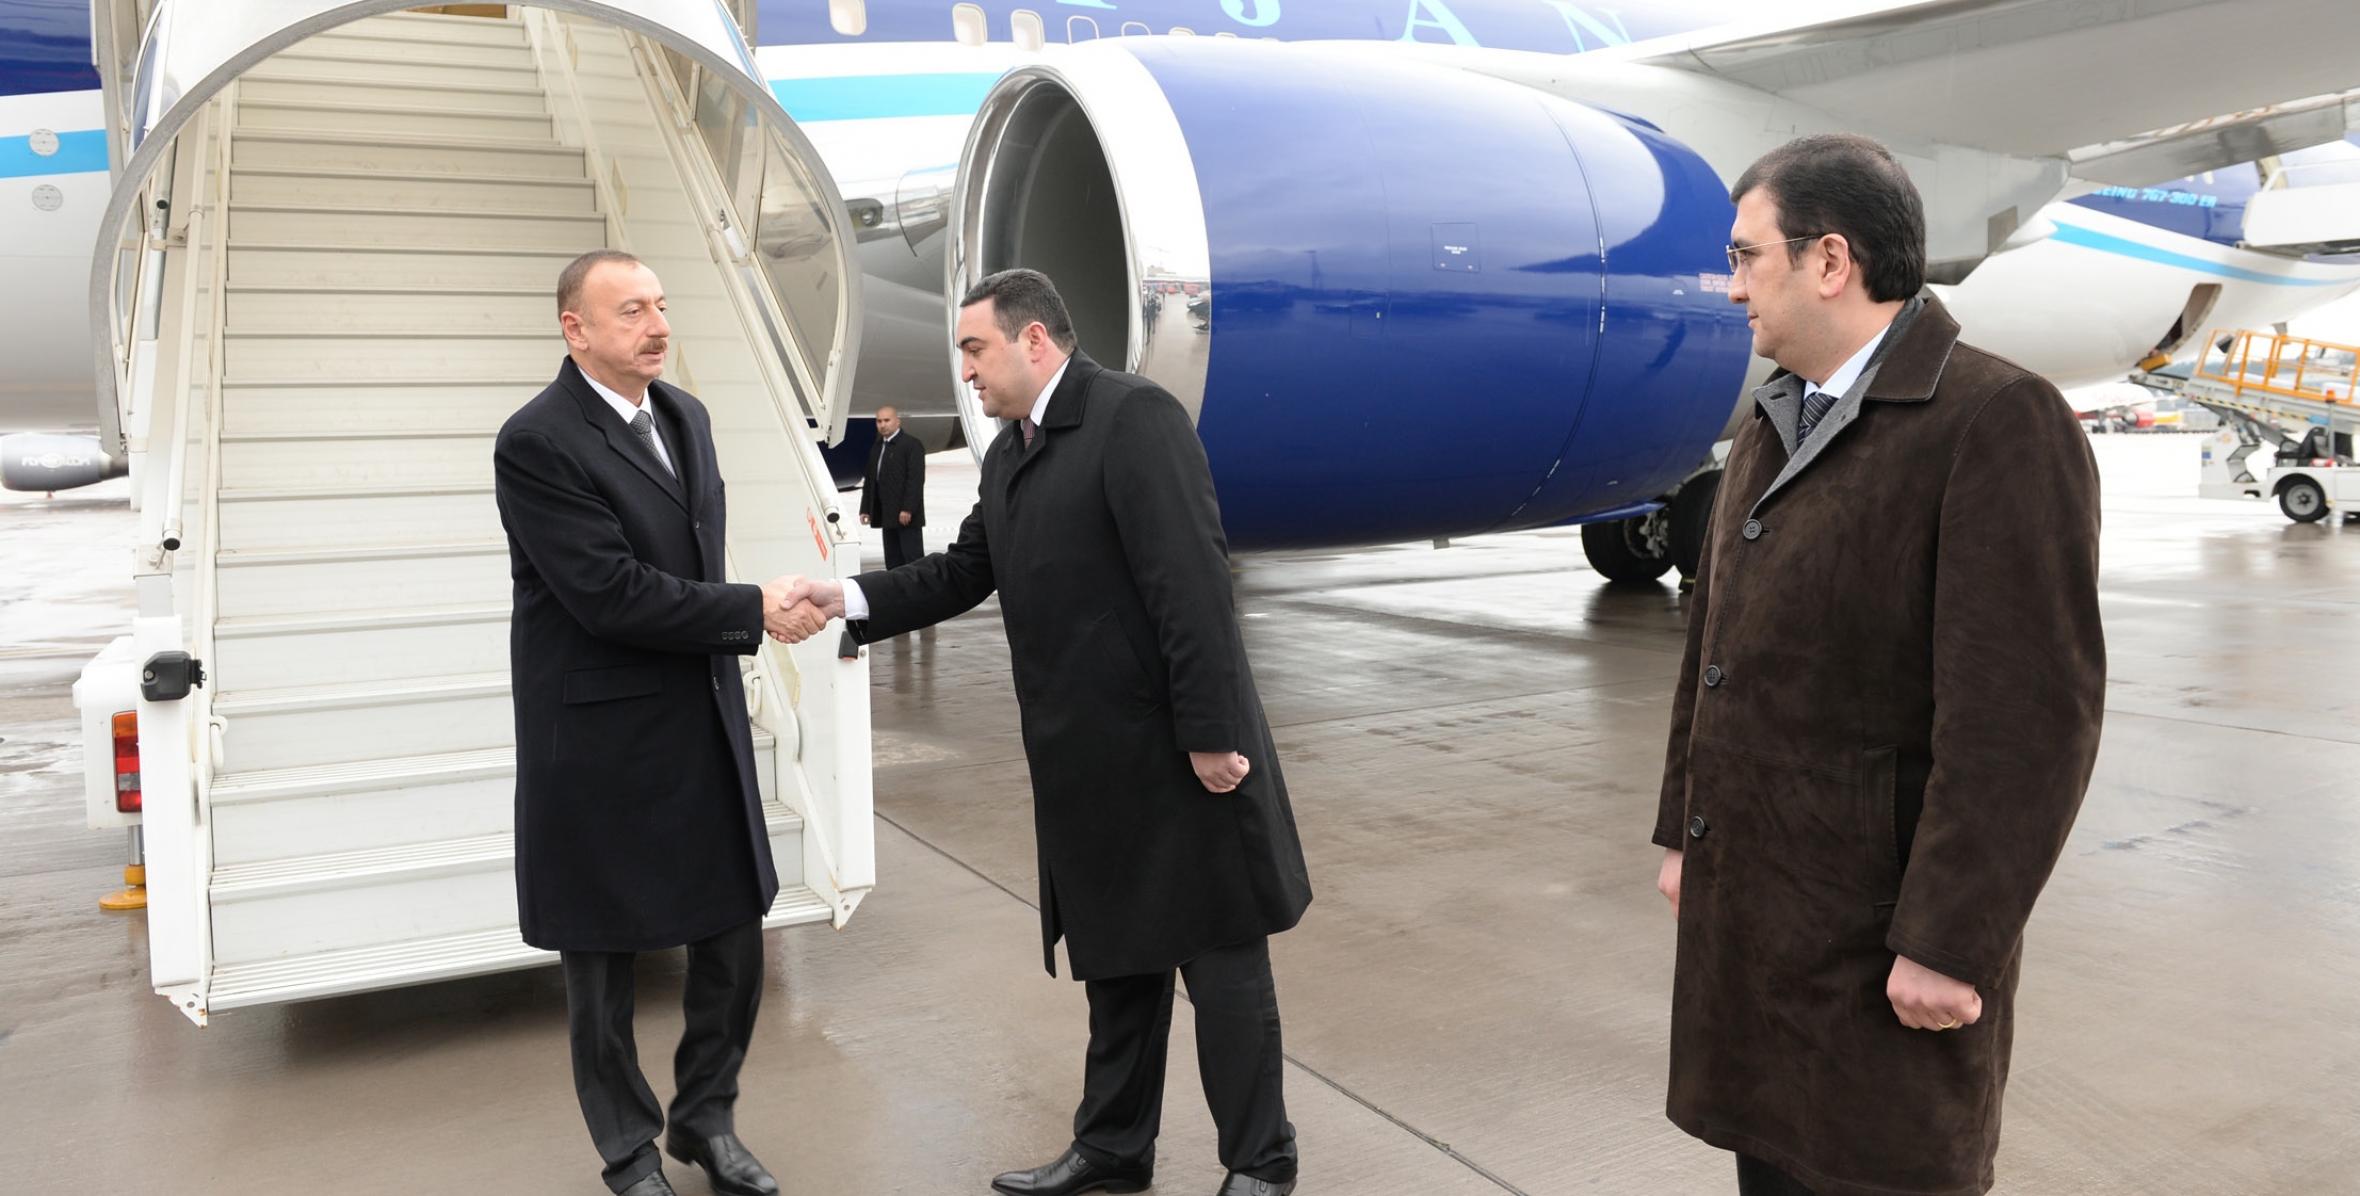 Ilham Aliyev arrived in Switzerland for a working visit